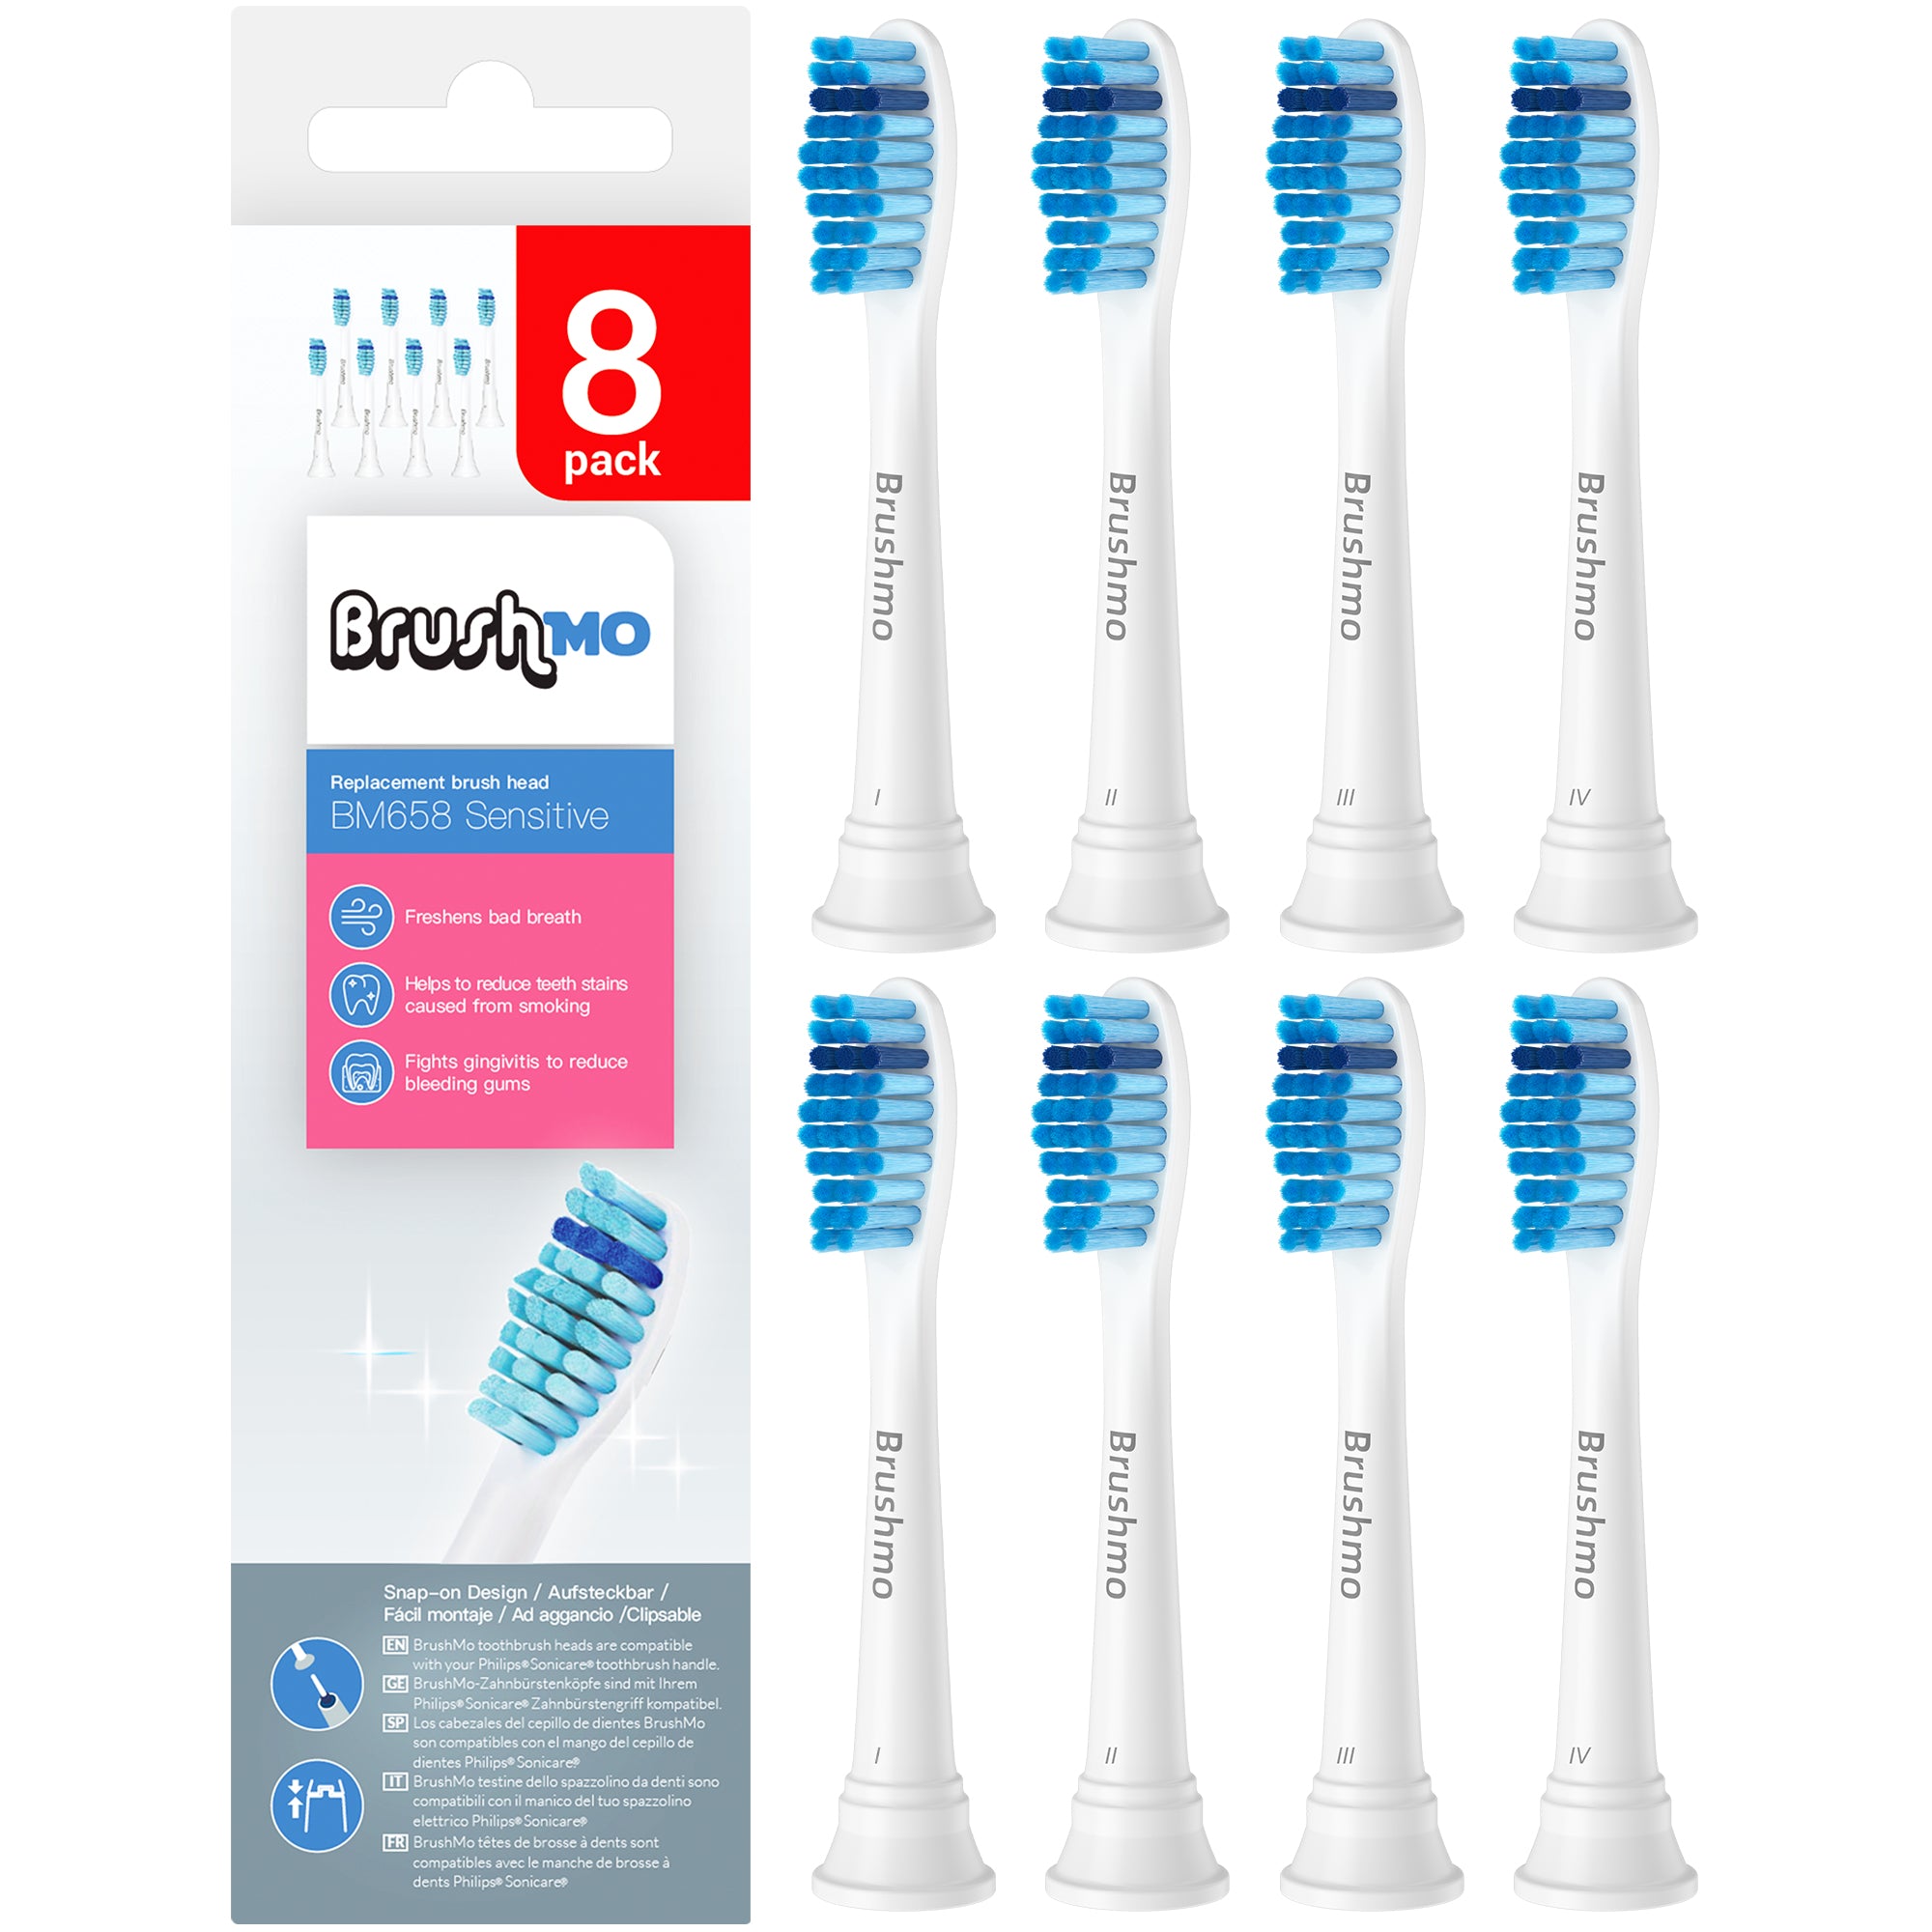 Replacement Toothbrush Heads Compatible with Phillips Sonicare Electric Toothbrush HX6053, 8 Pack Sensitive